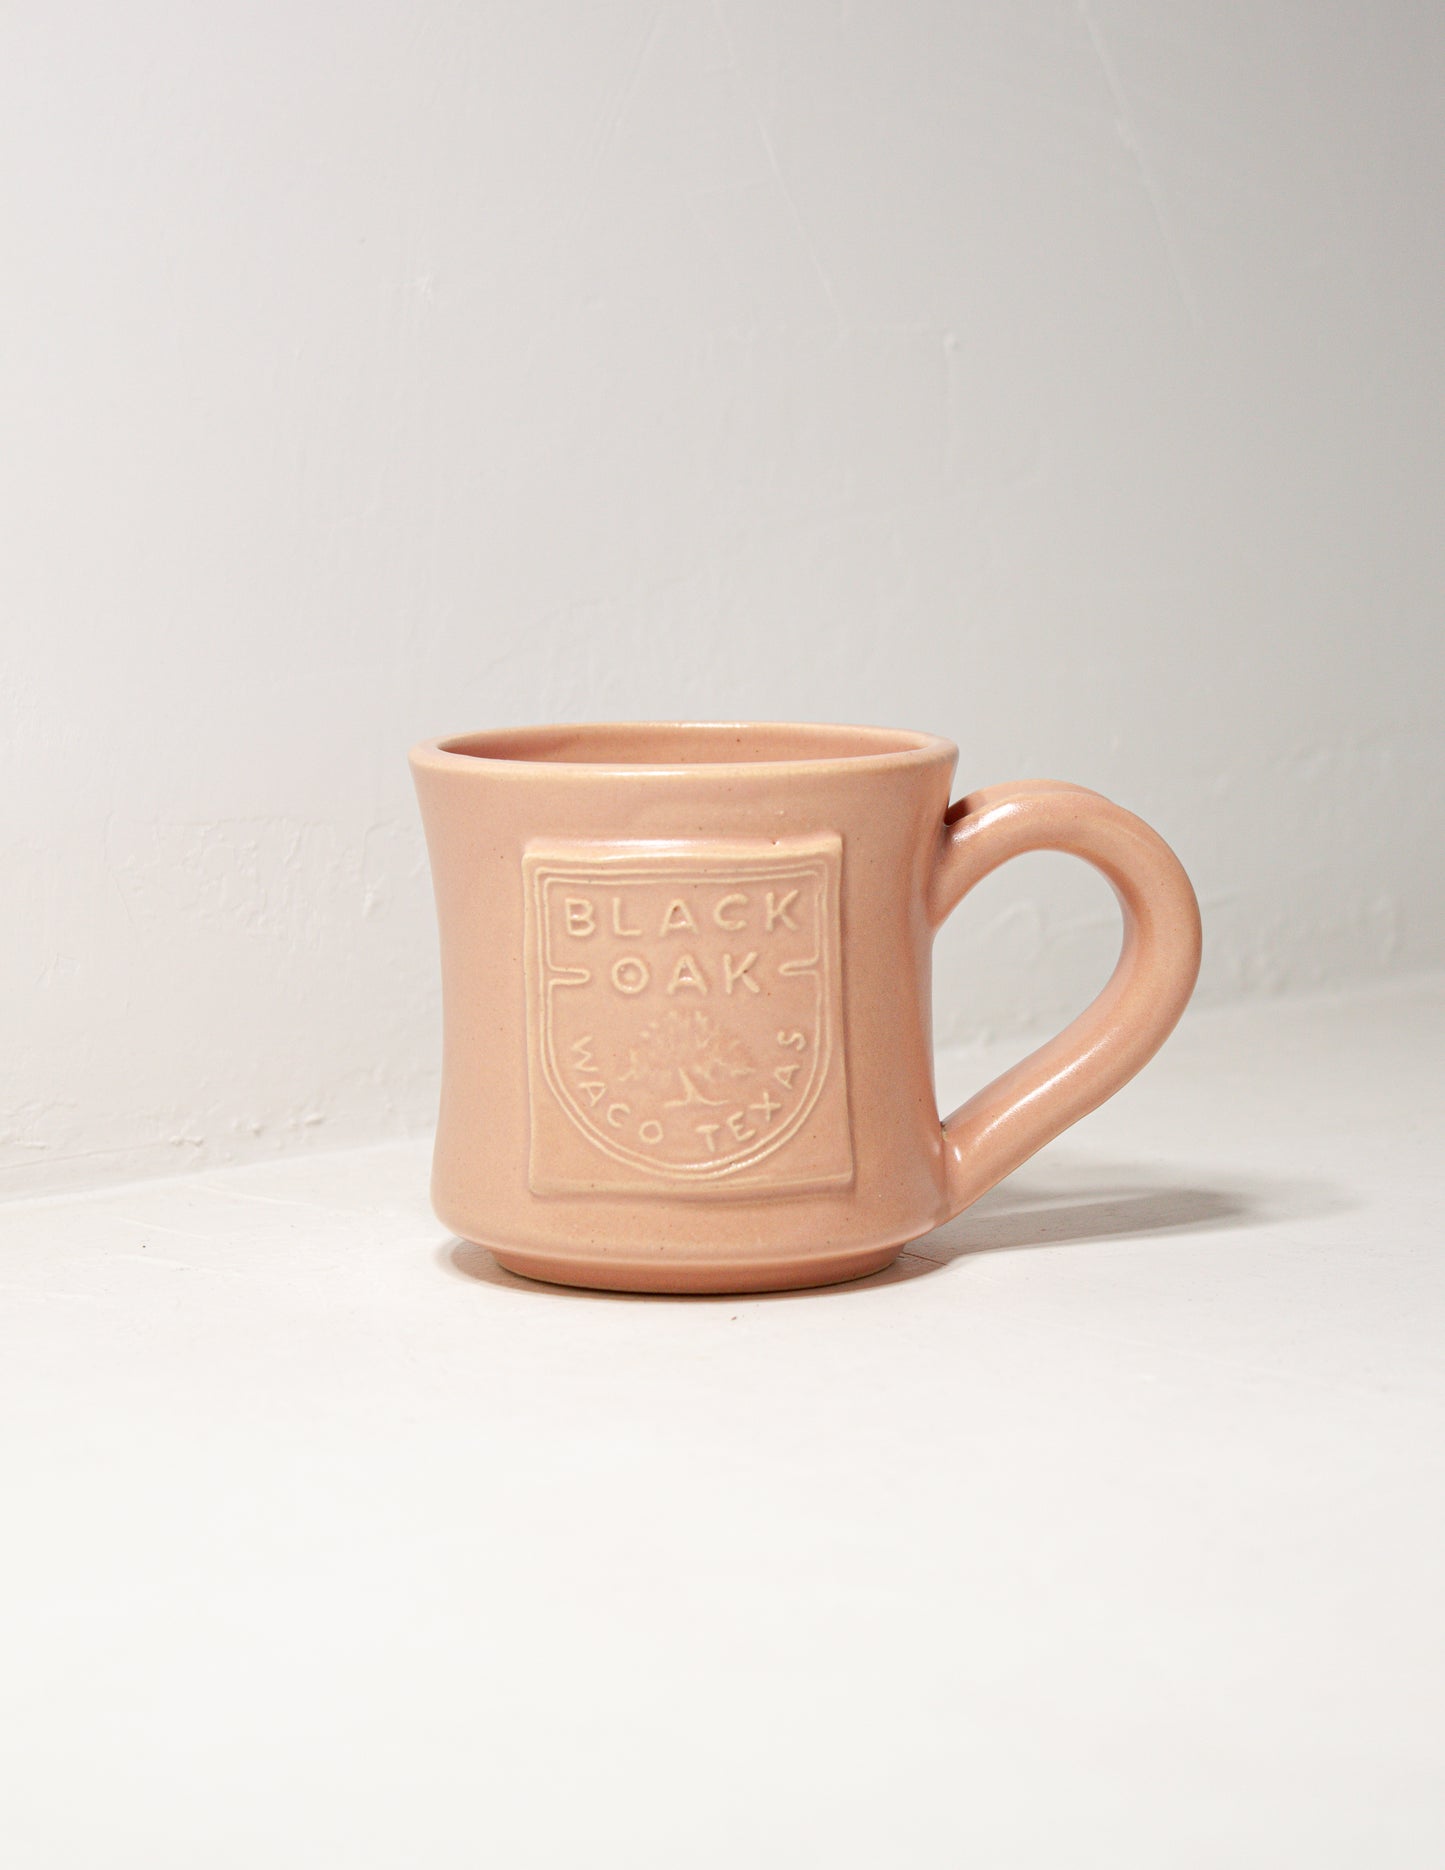 Hand thrown coffee mug in standard shape with matte coral glaze